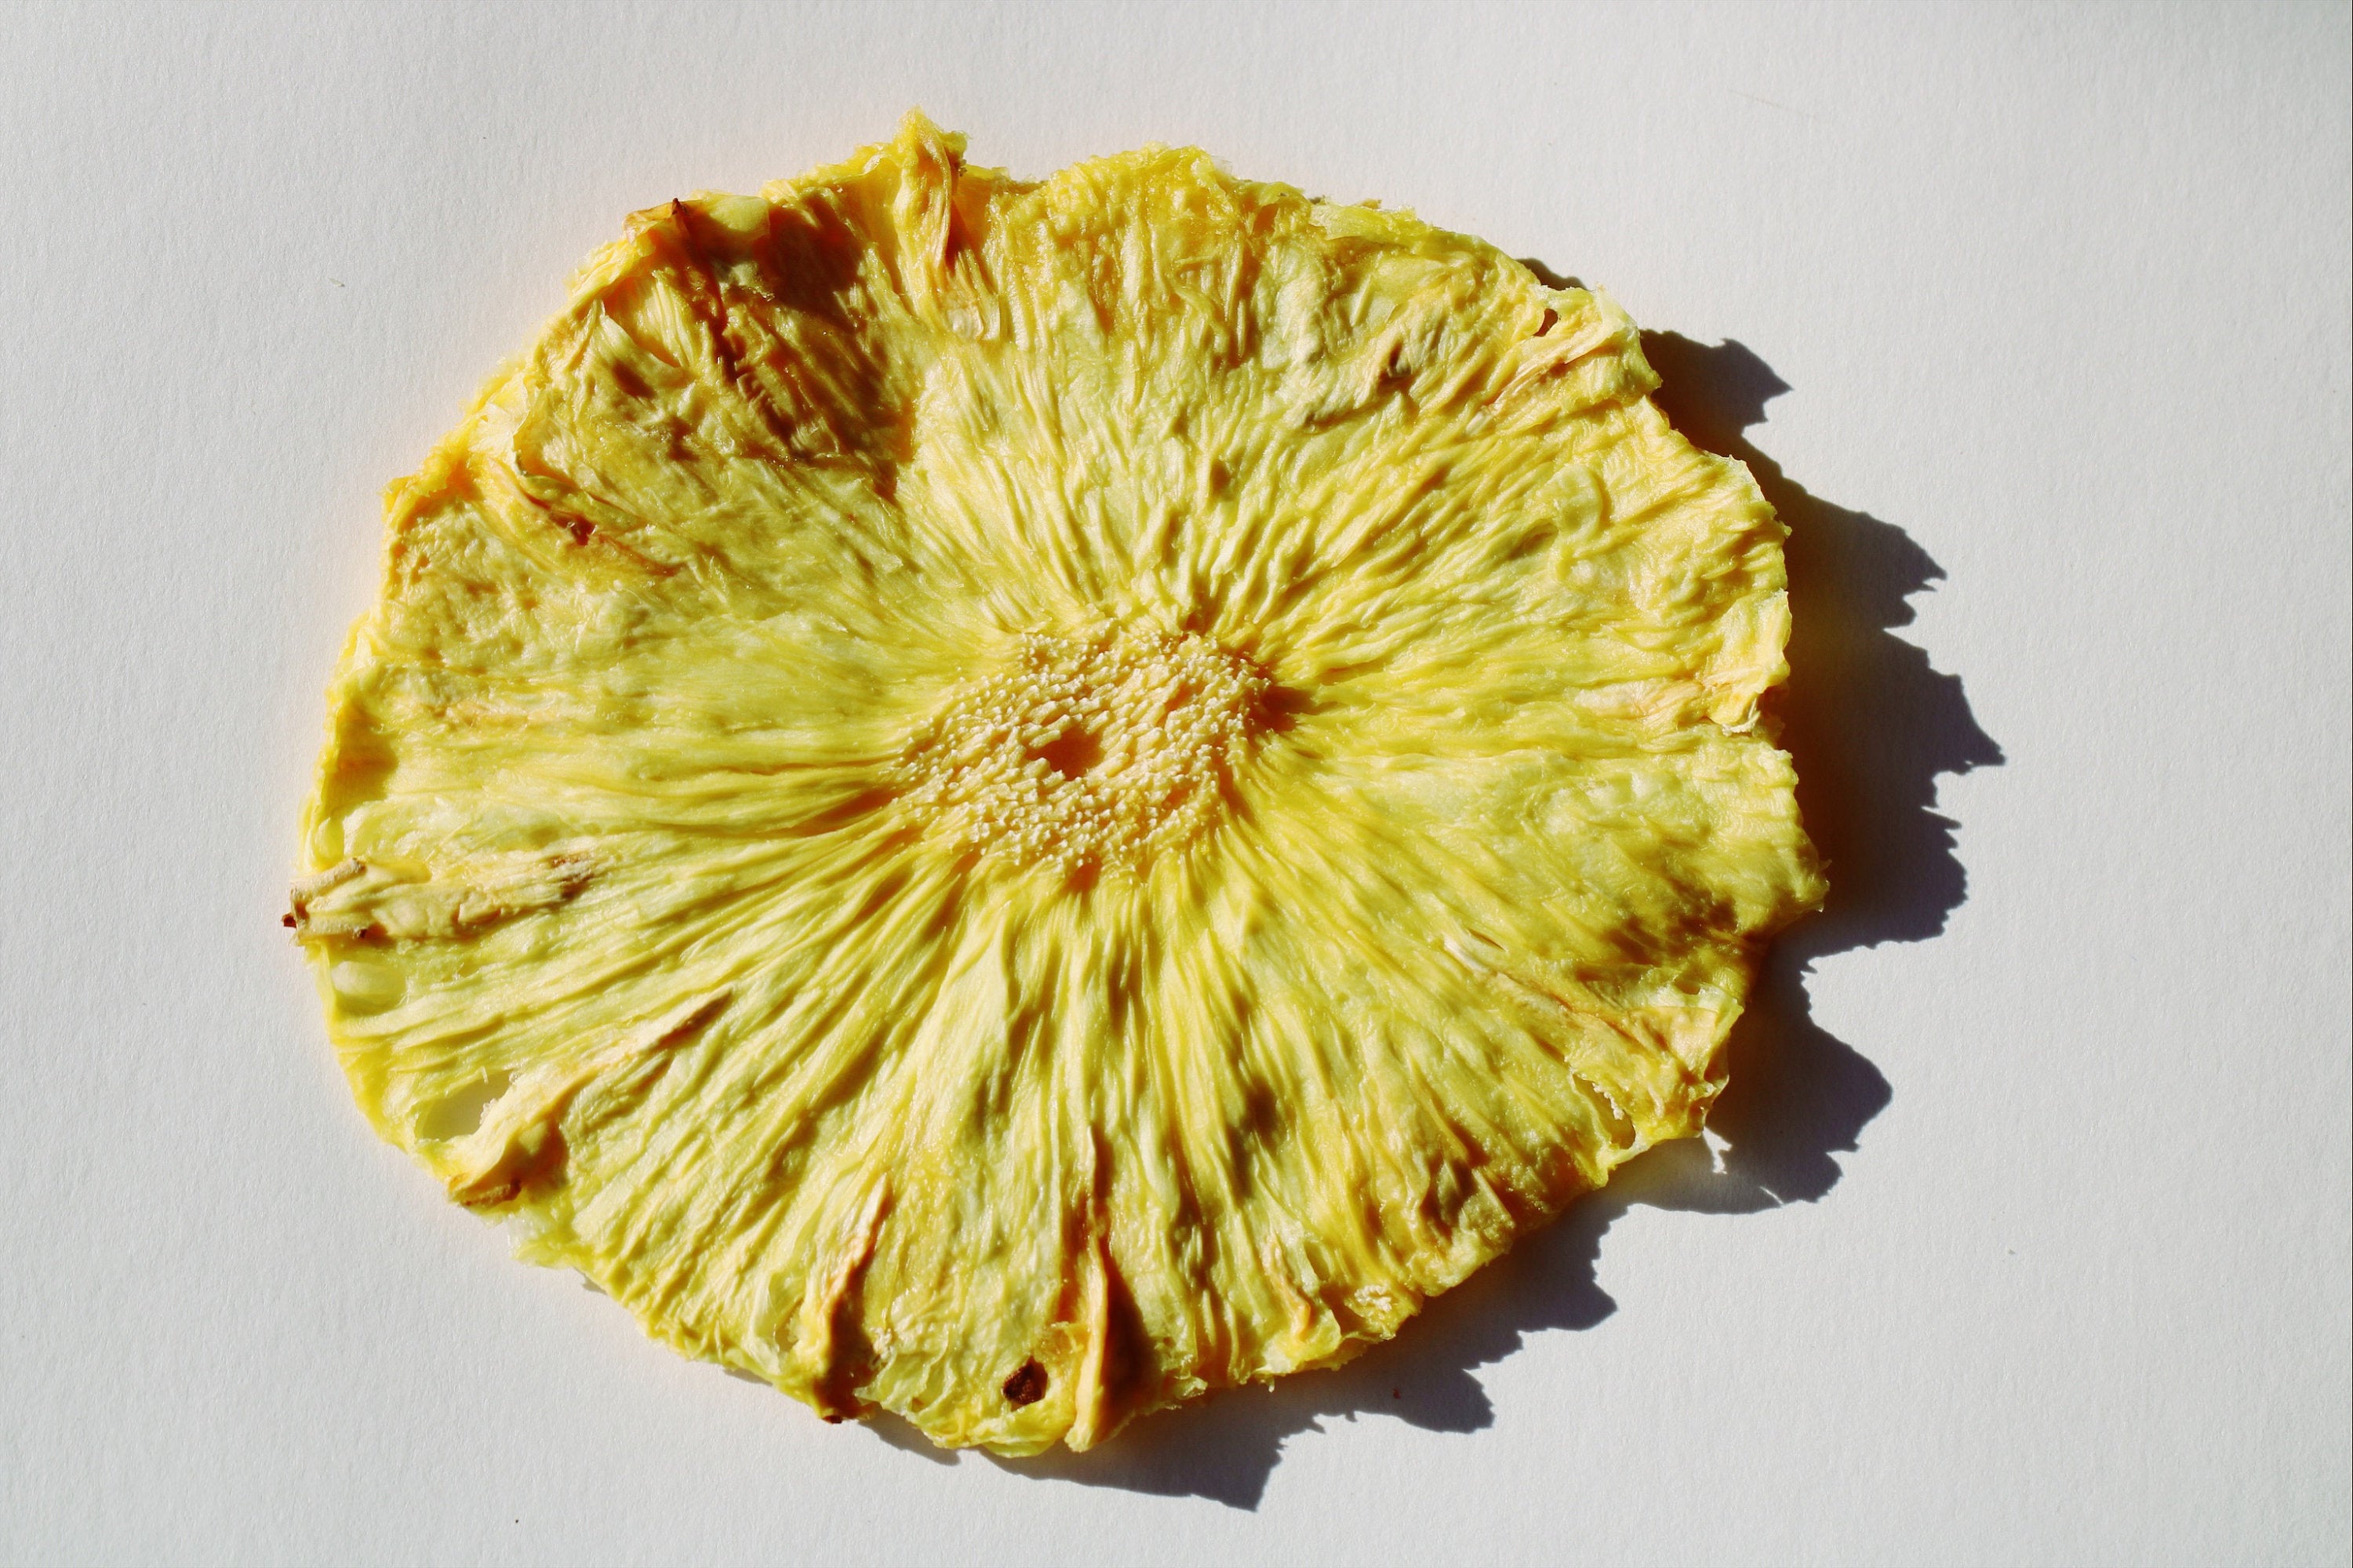 Dehydrated Pineapple